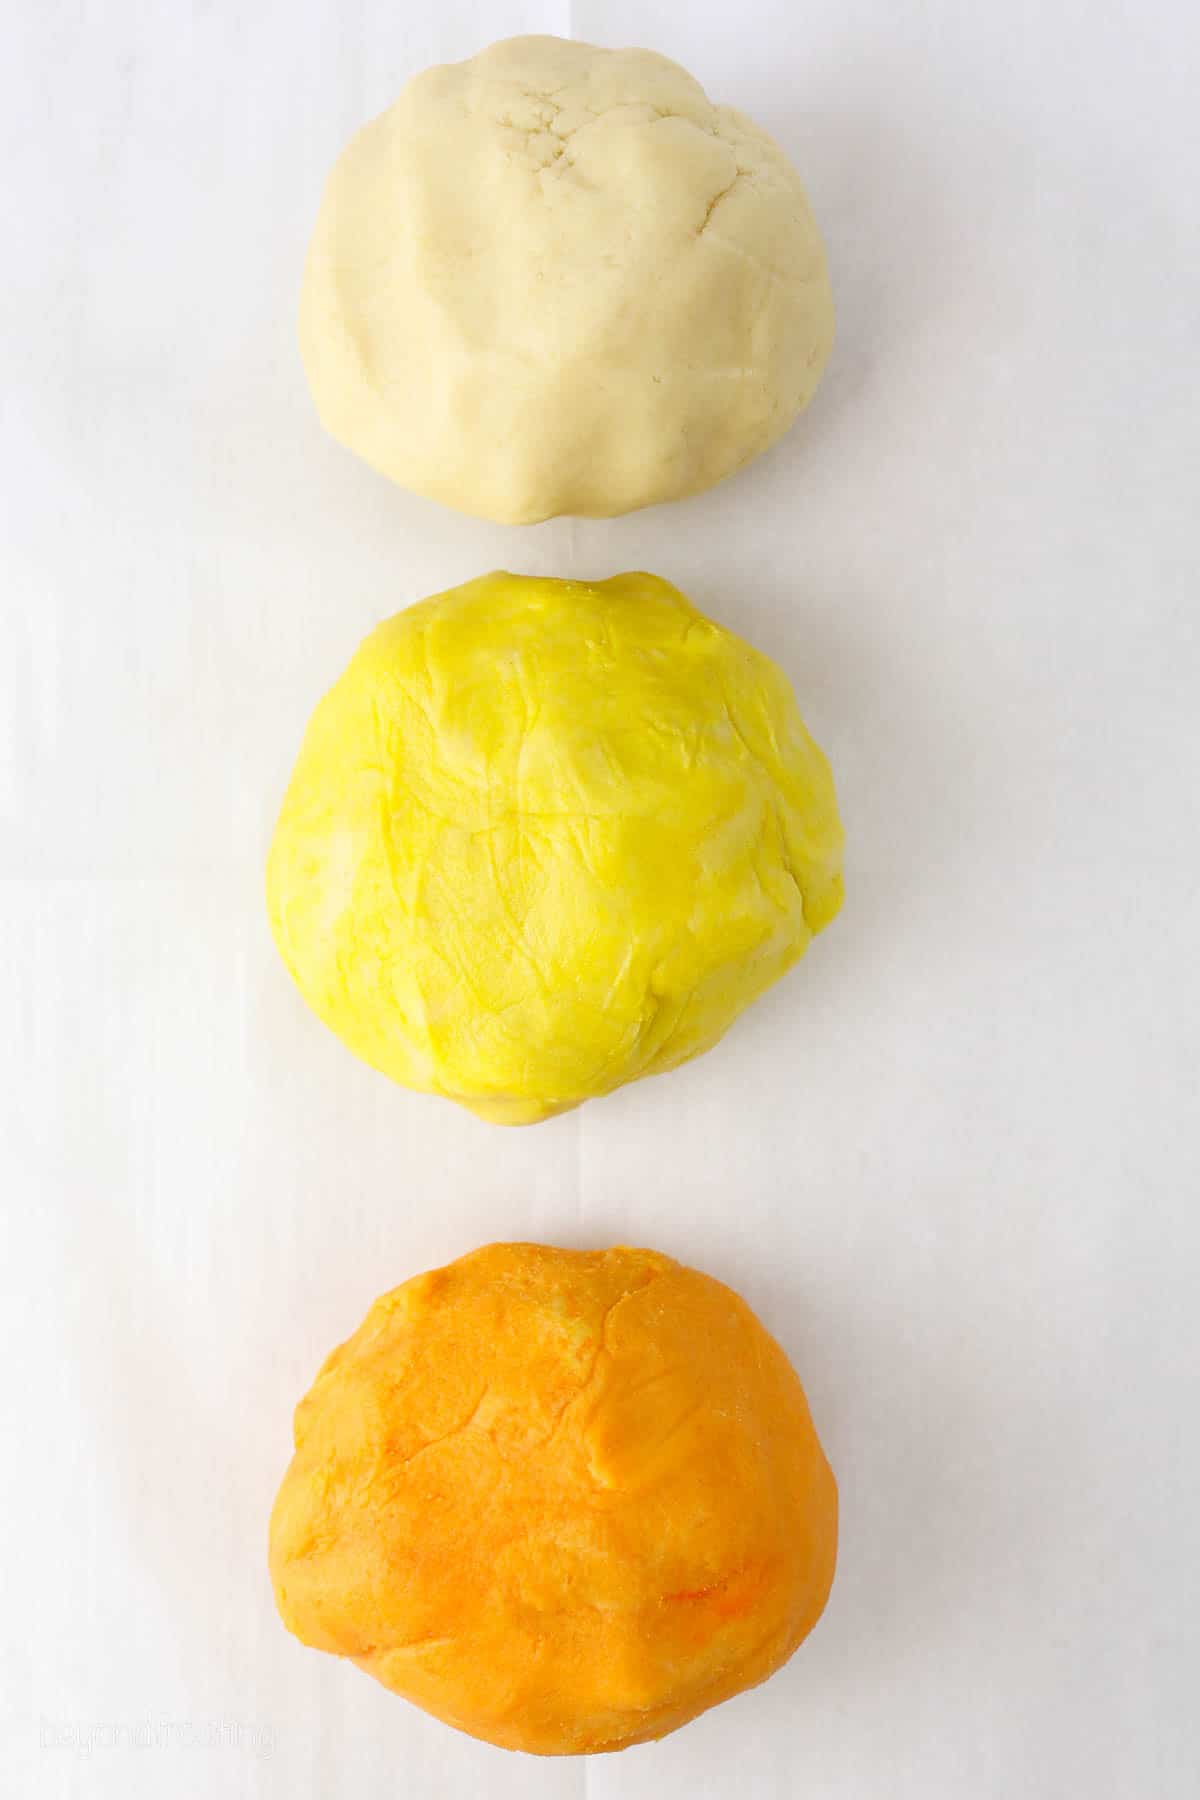 Three large portions of sugar cookie dough colored white, yellow, and orange.